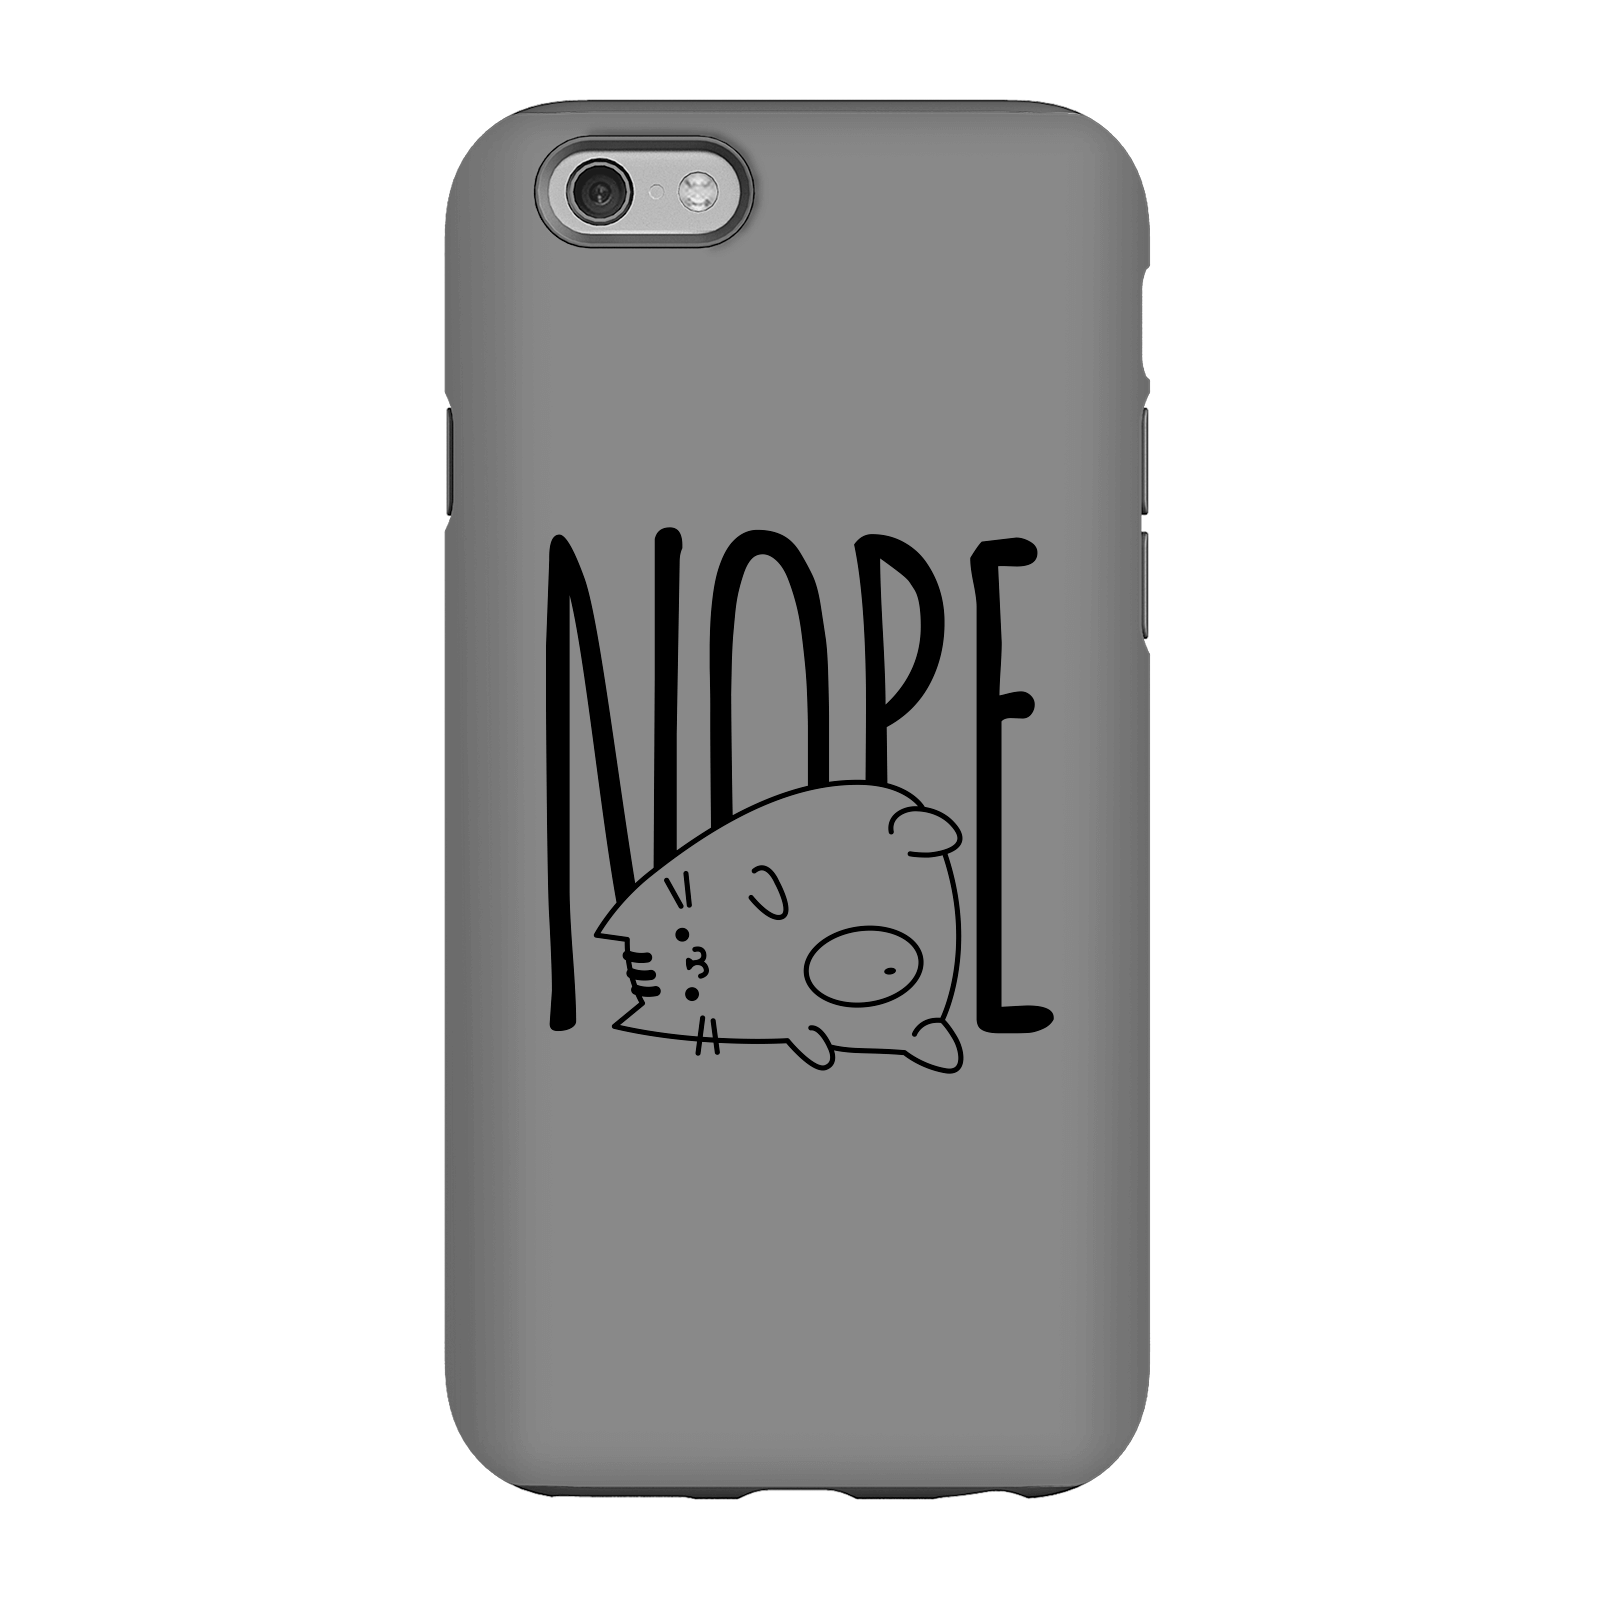 Nope Phone Case for iPhone and Android - iPhone 6 - Tough Case - Matte